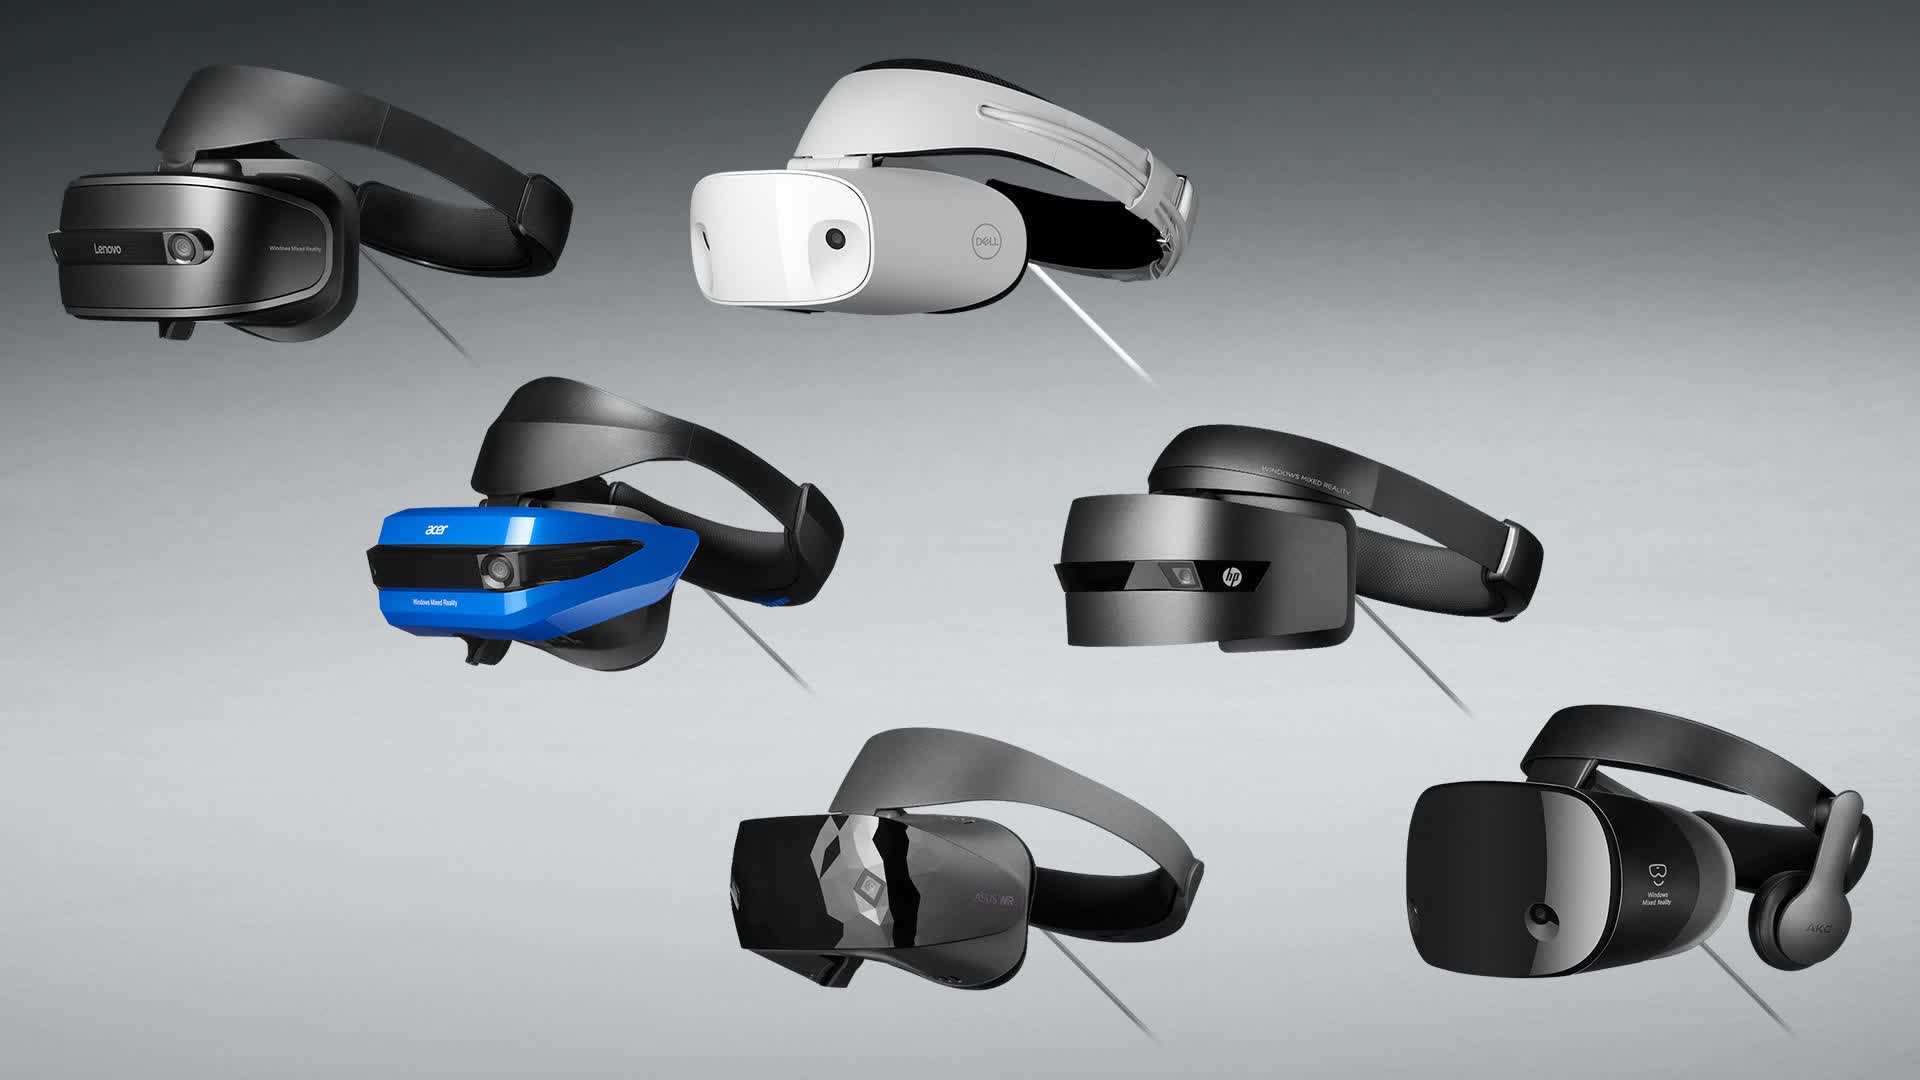 Microsoft deprecates Windows Mixed Reality, several headsets could become e-waste